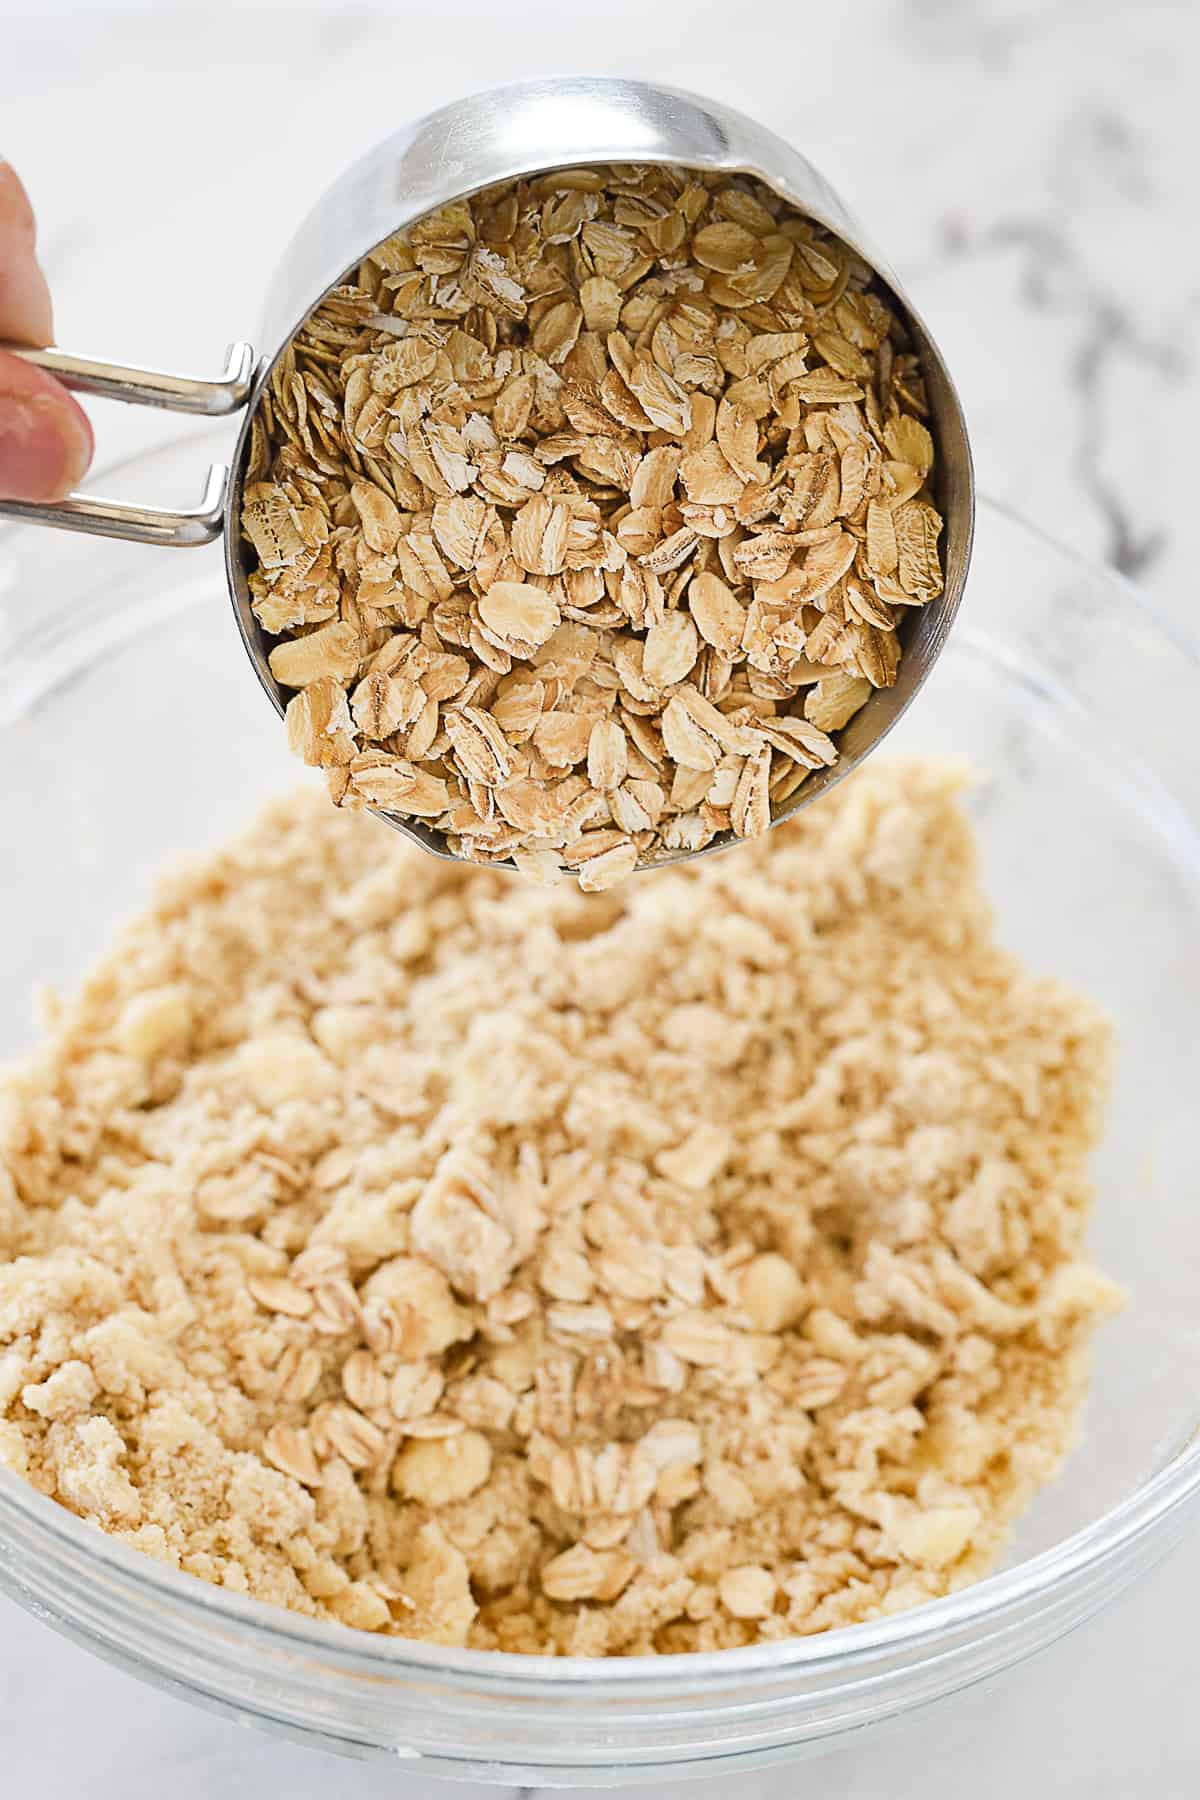 ADDING OATS TO STREUSEL TOPPING